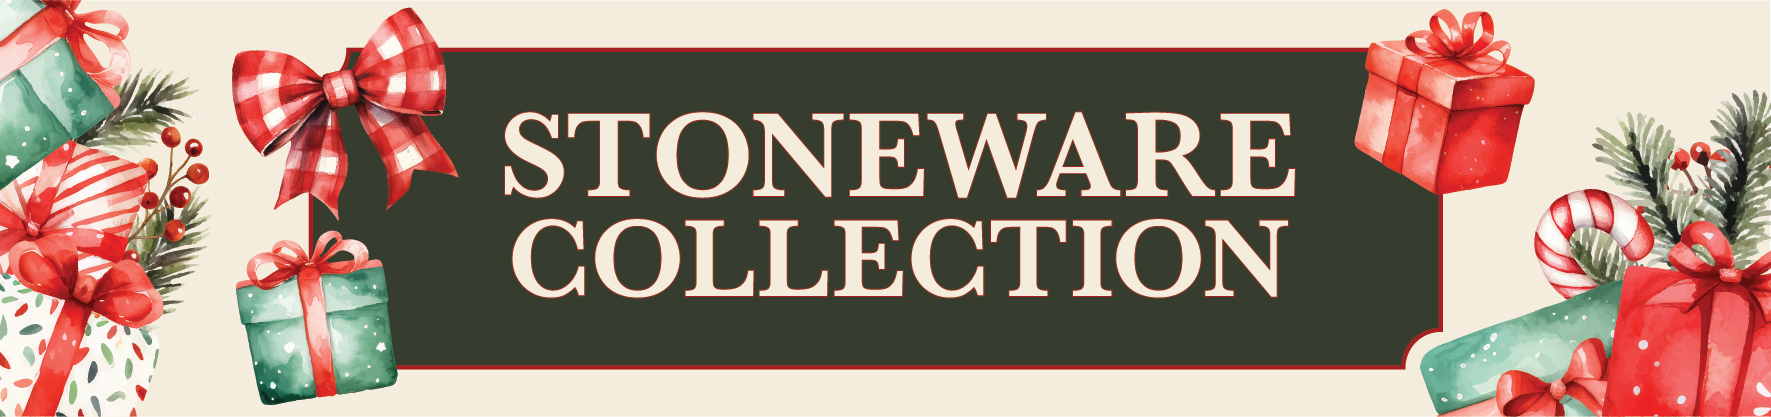 Stoneware Collection